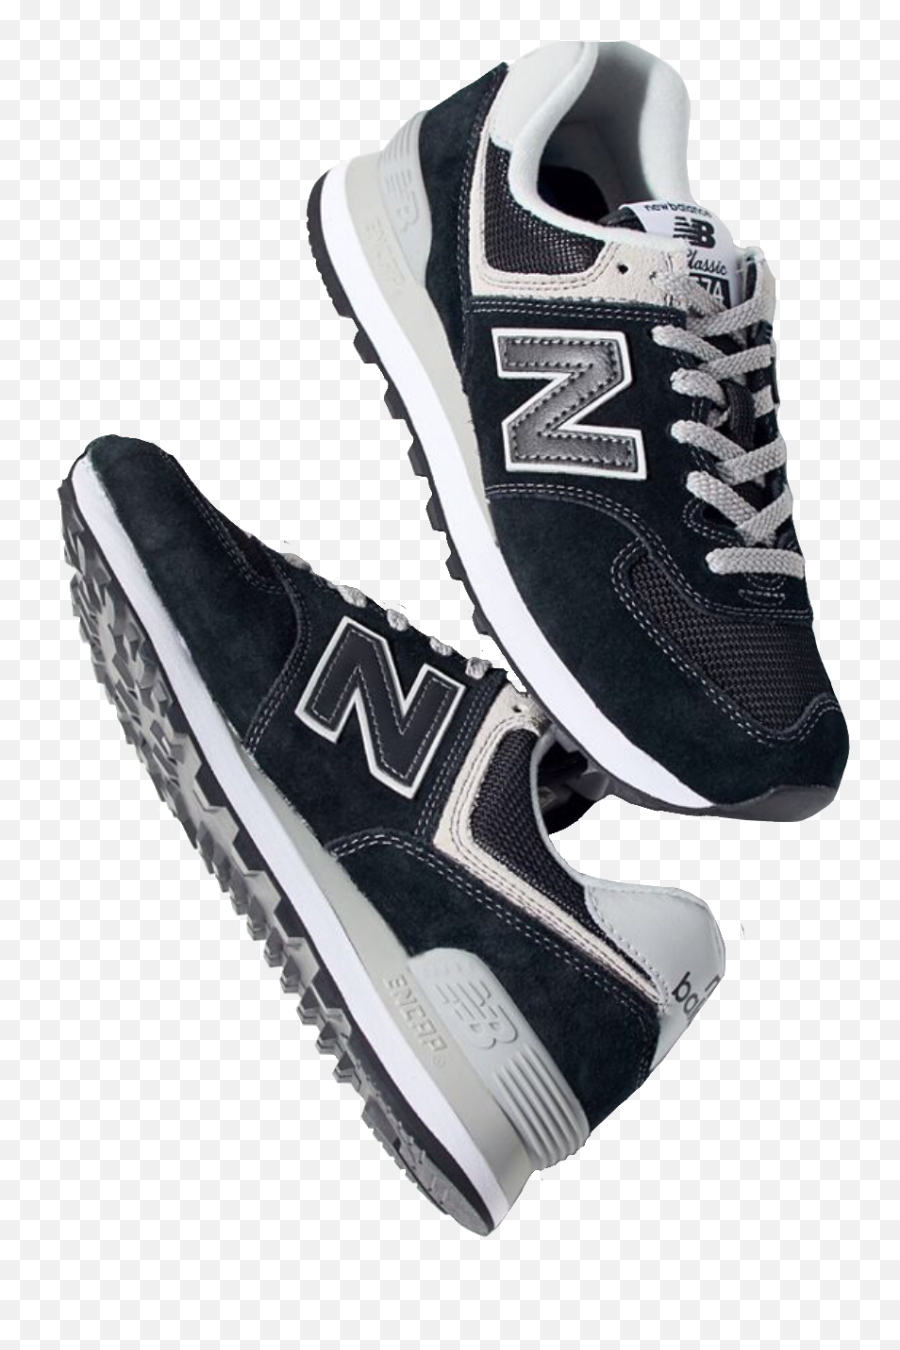 New Balance Shoes Womens Sneakers - Zapatos New Balance Png Emoji,Sneaker Png